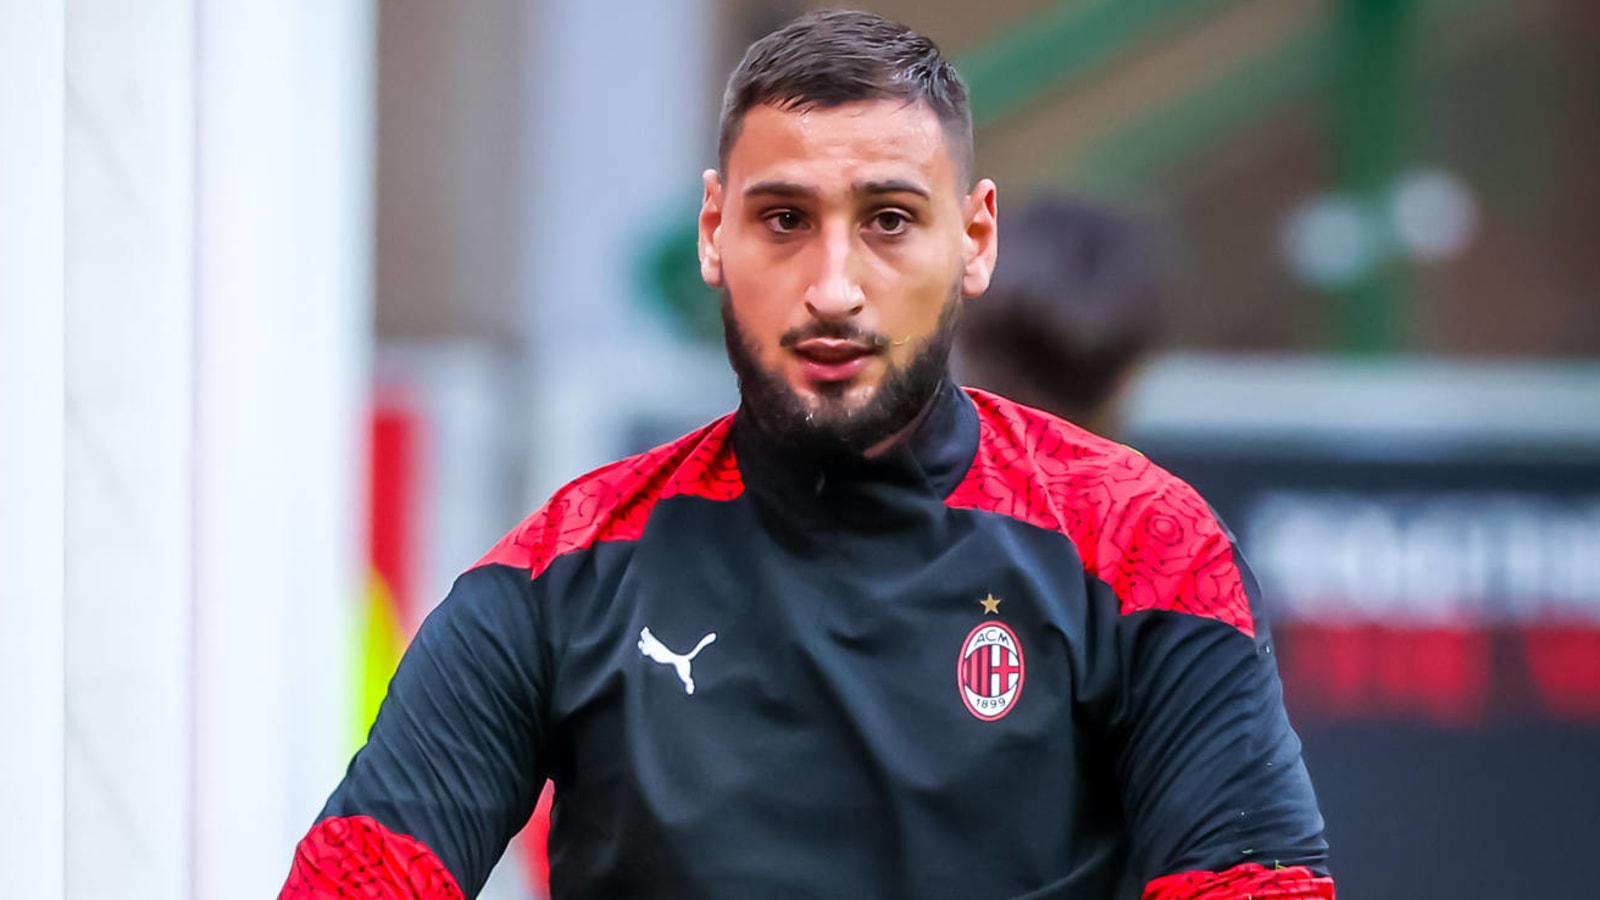 Two AC Milan players test positive for coronavirus